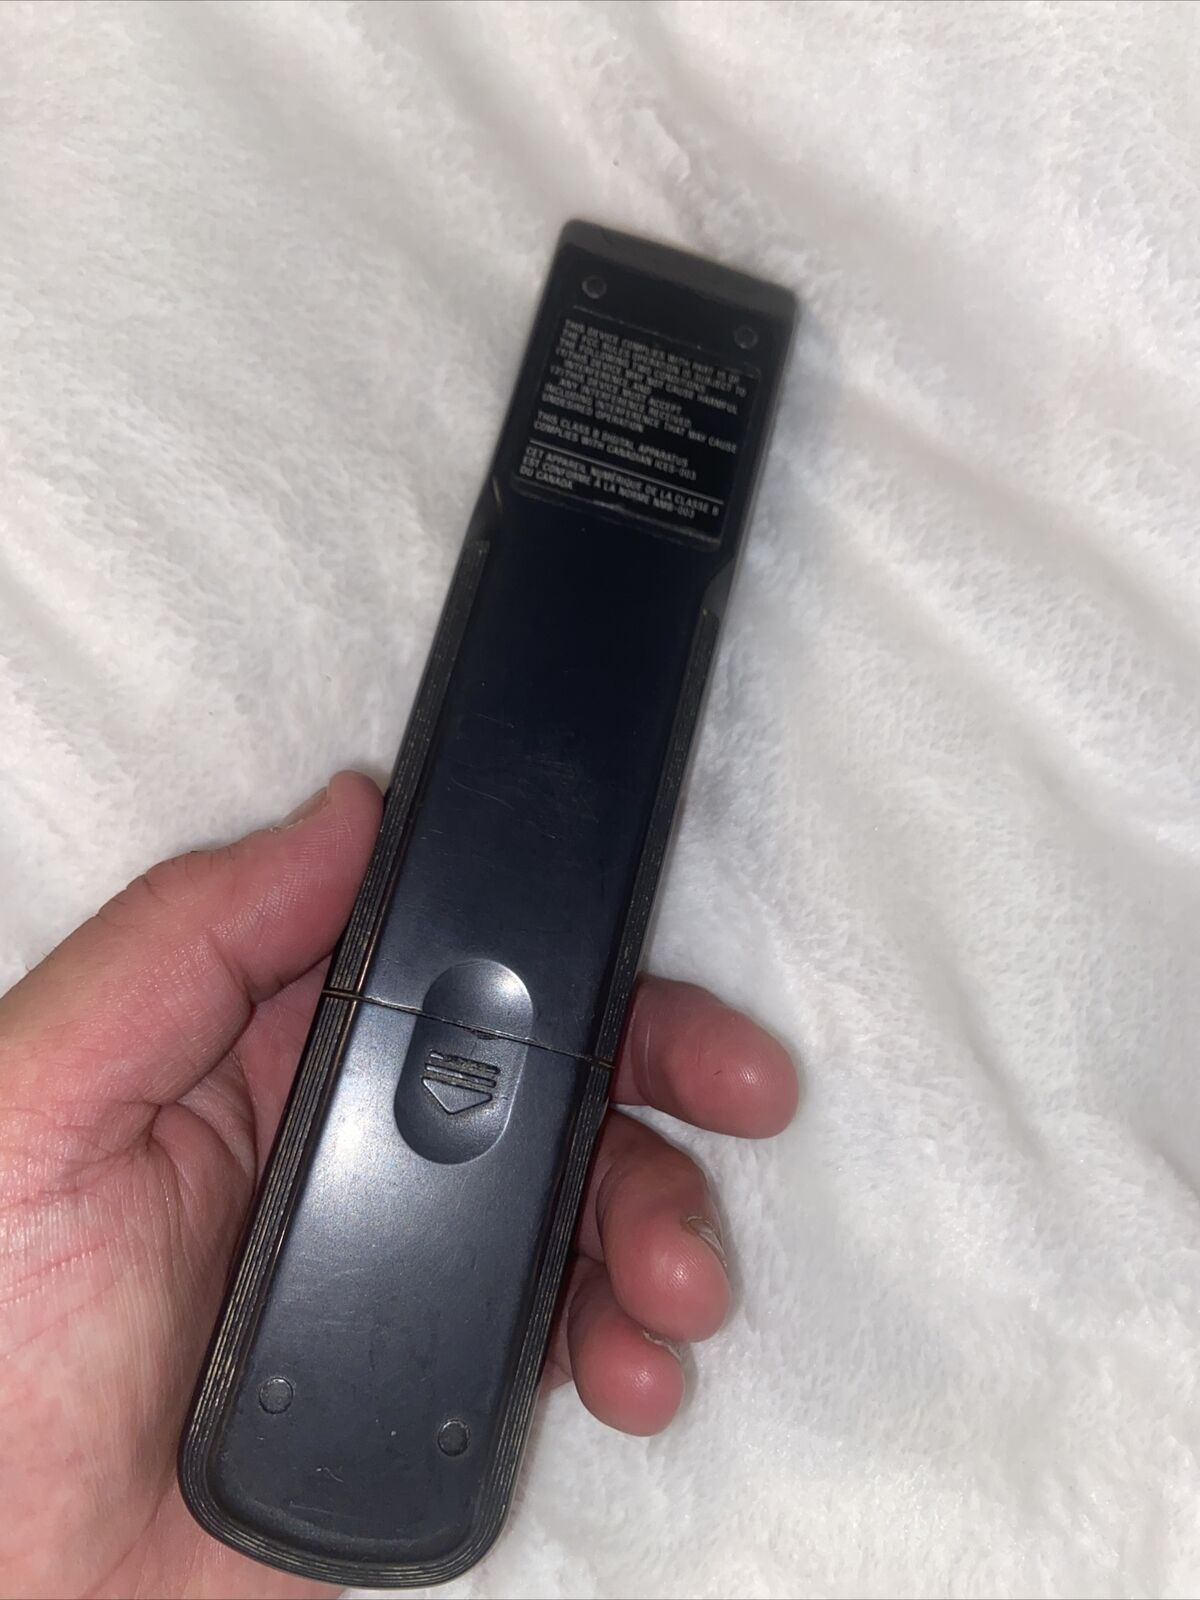 Sony Rmt v307a replacement remote